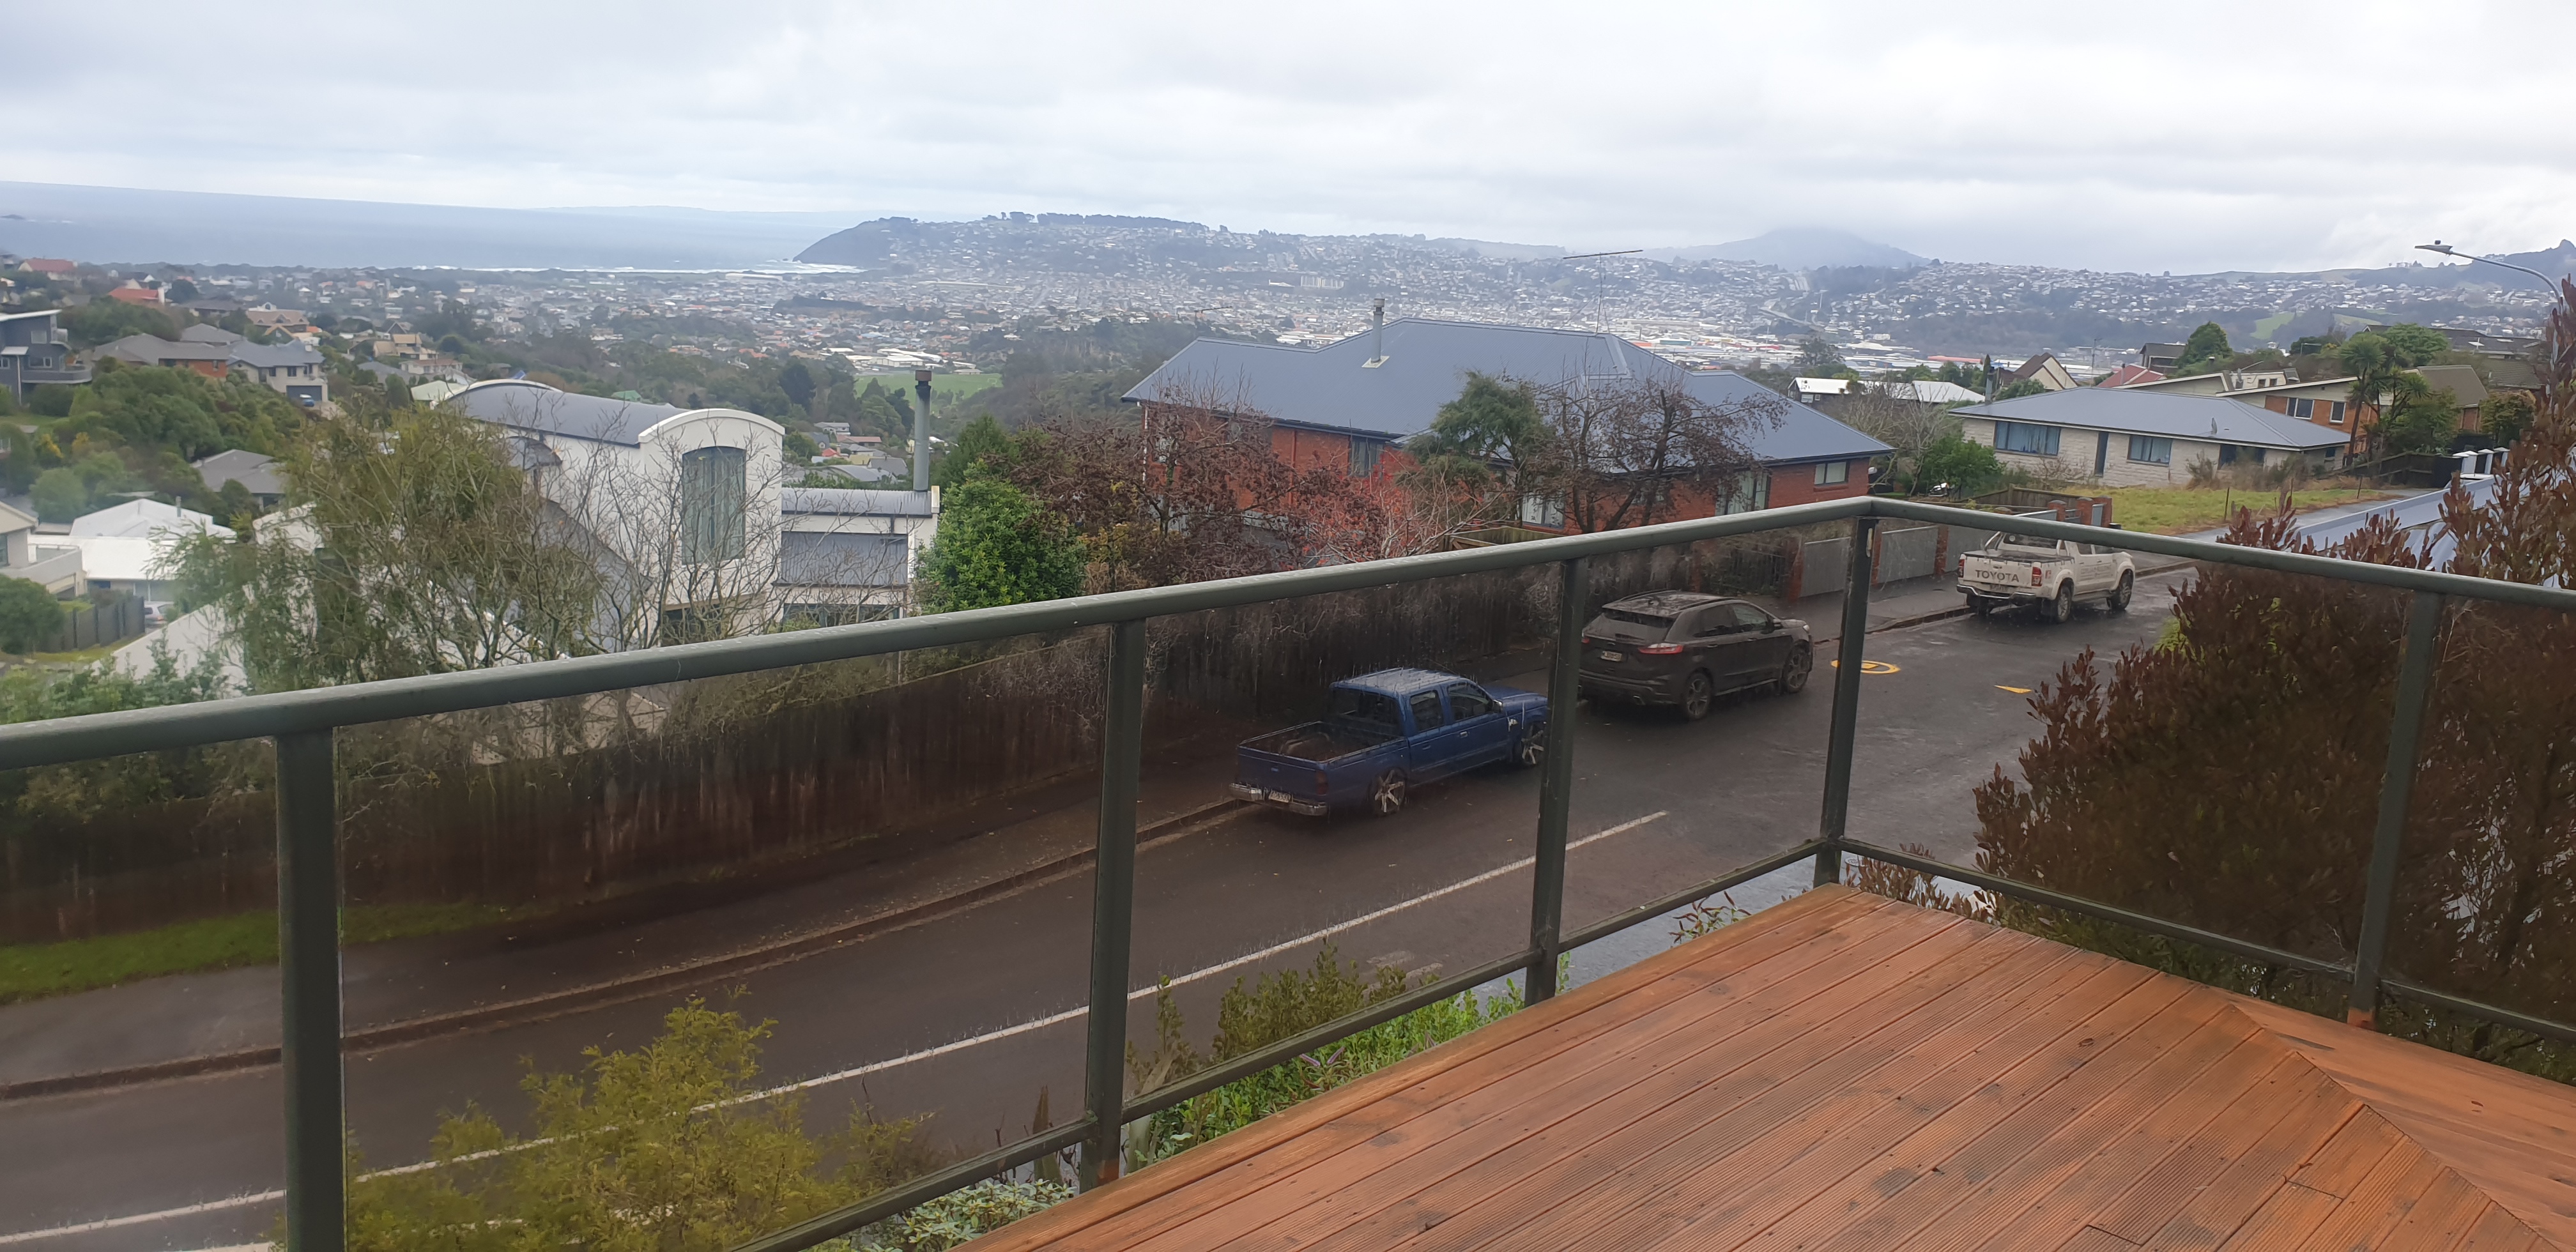 At least the fog cleared in Dunedin - view from Moodie St